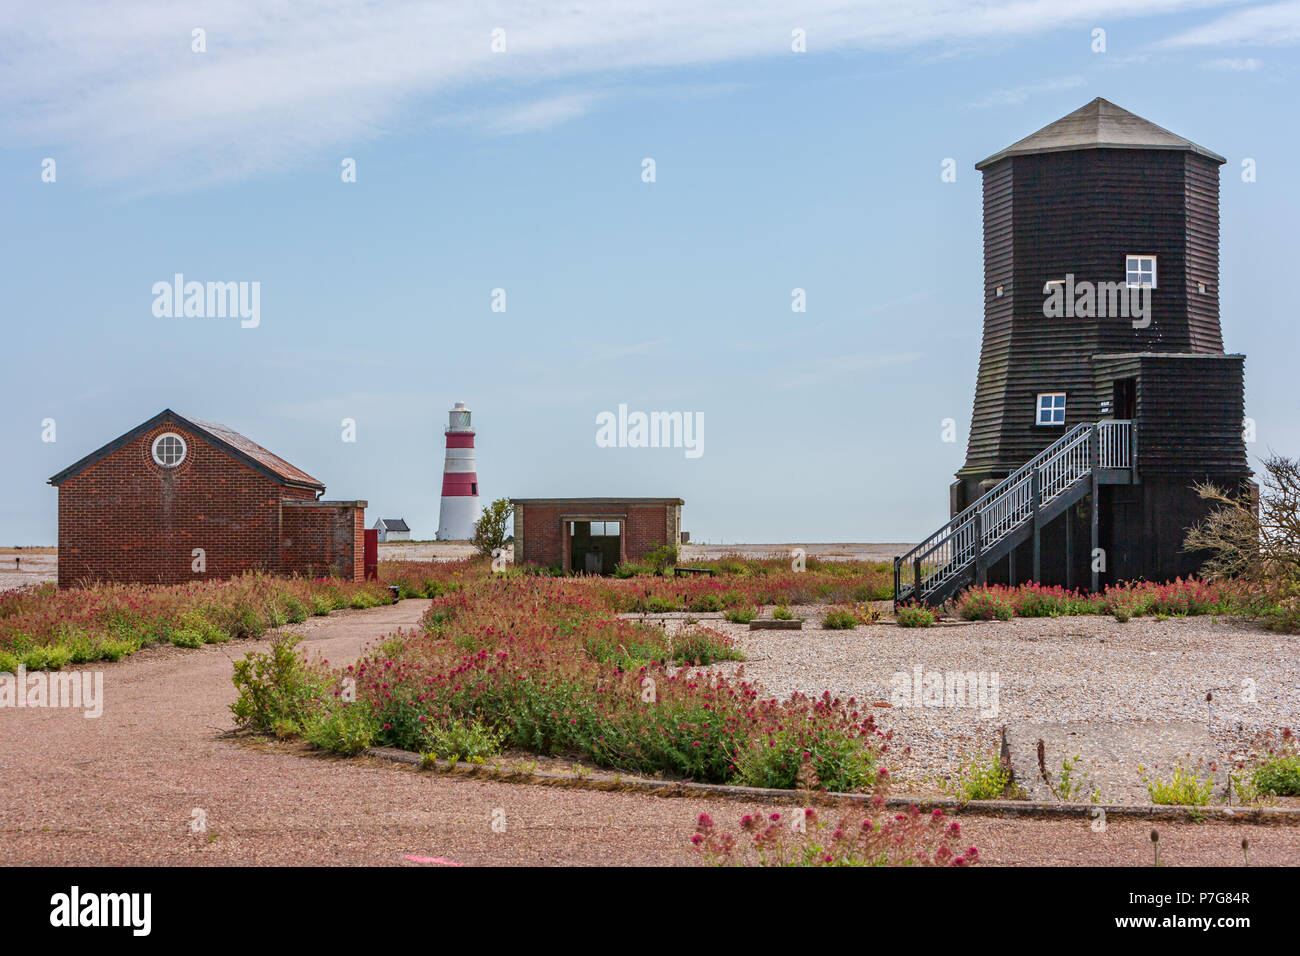 The Orfordness Rotating Wireless Beacon, known simply as the Orfordness Beacon or sometimes the Black Beacon, was an early radio navigation system Stock Photo